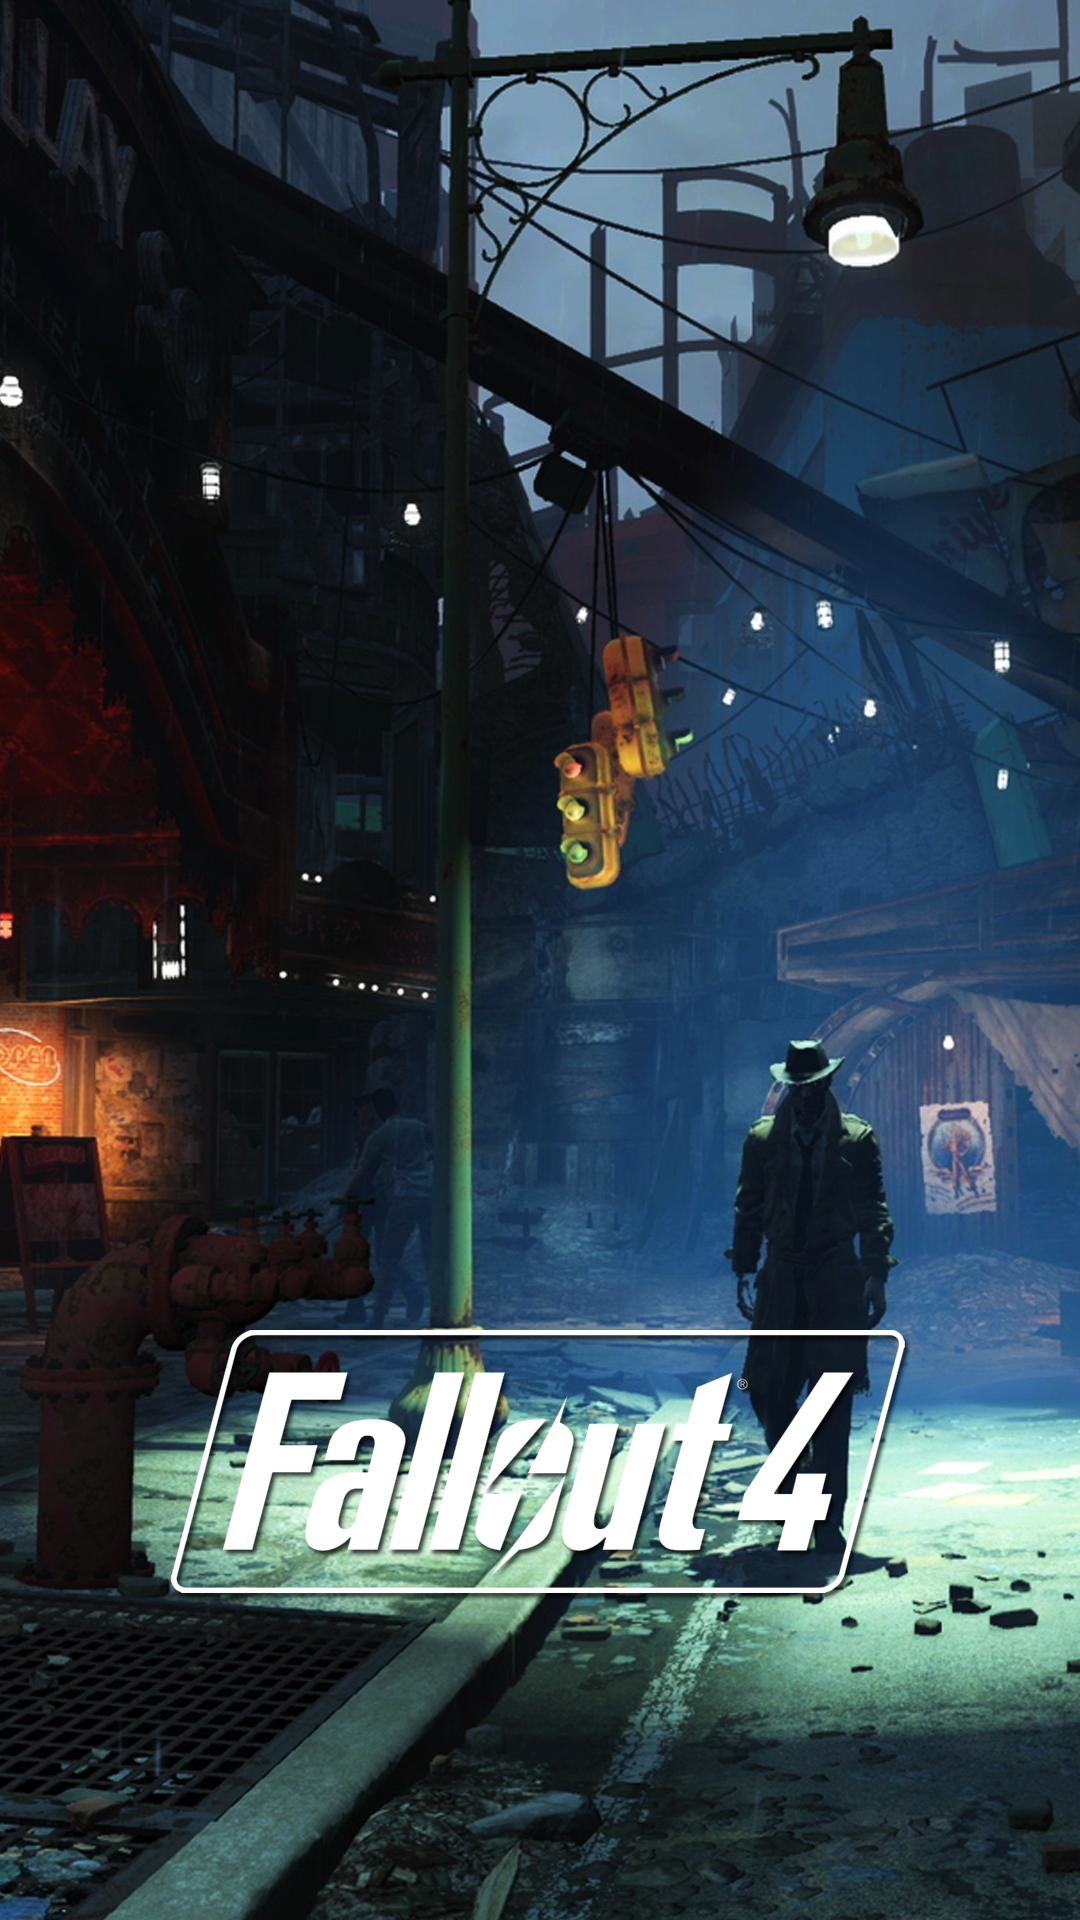 1080x1920 Fallout 4 nieuws Prachtige iPhone en Android wallpapers voor Fallout  